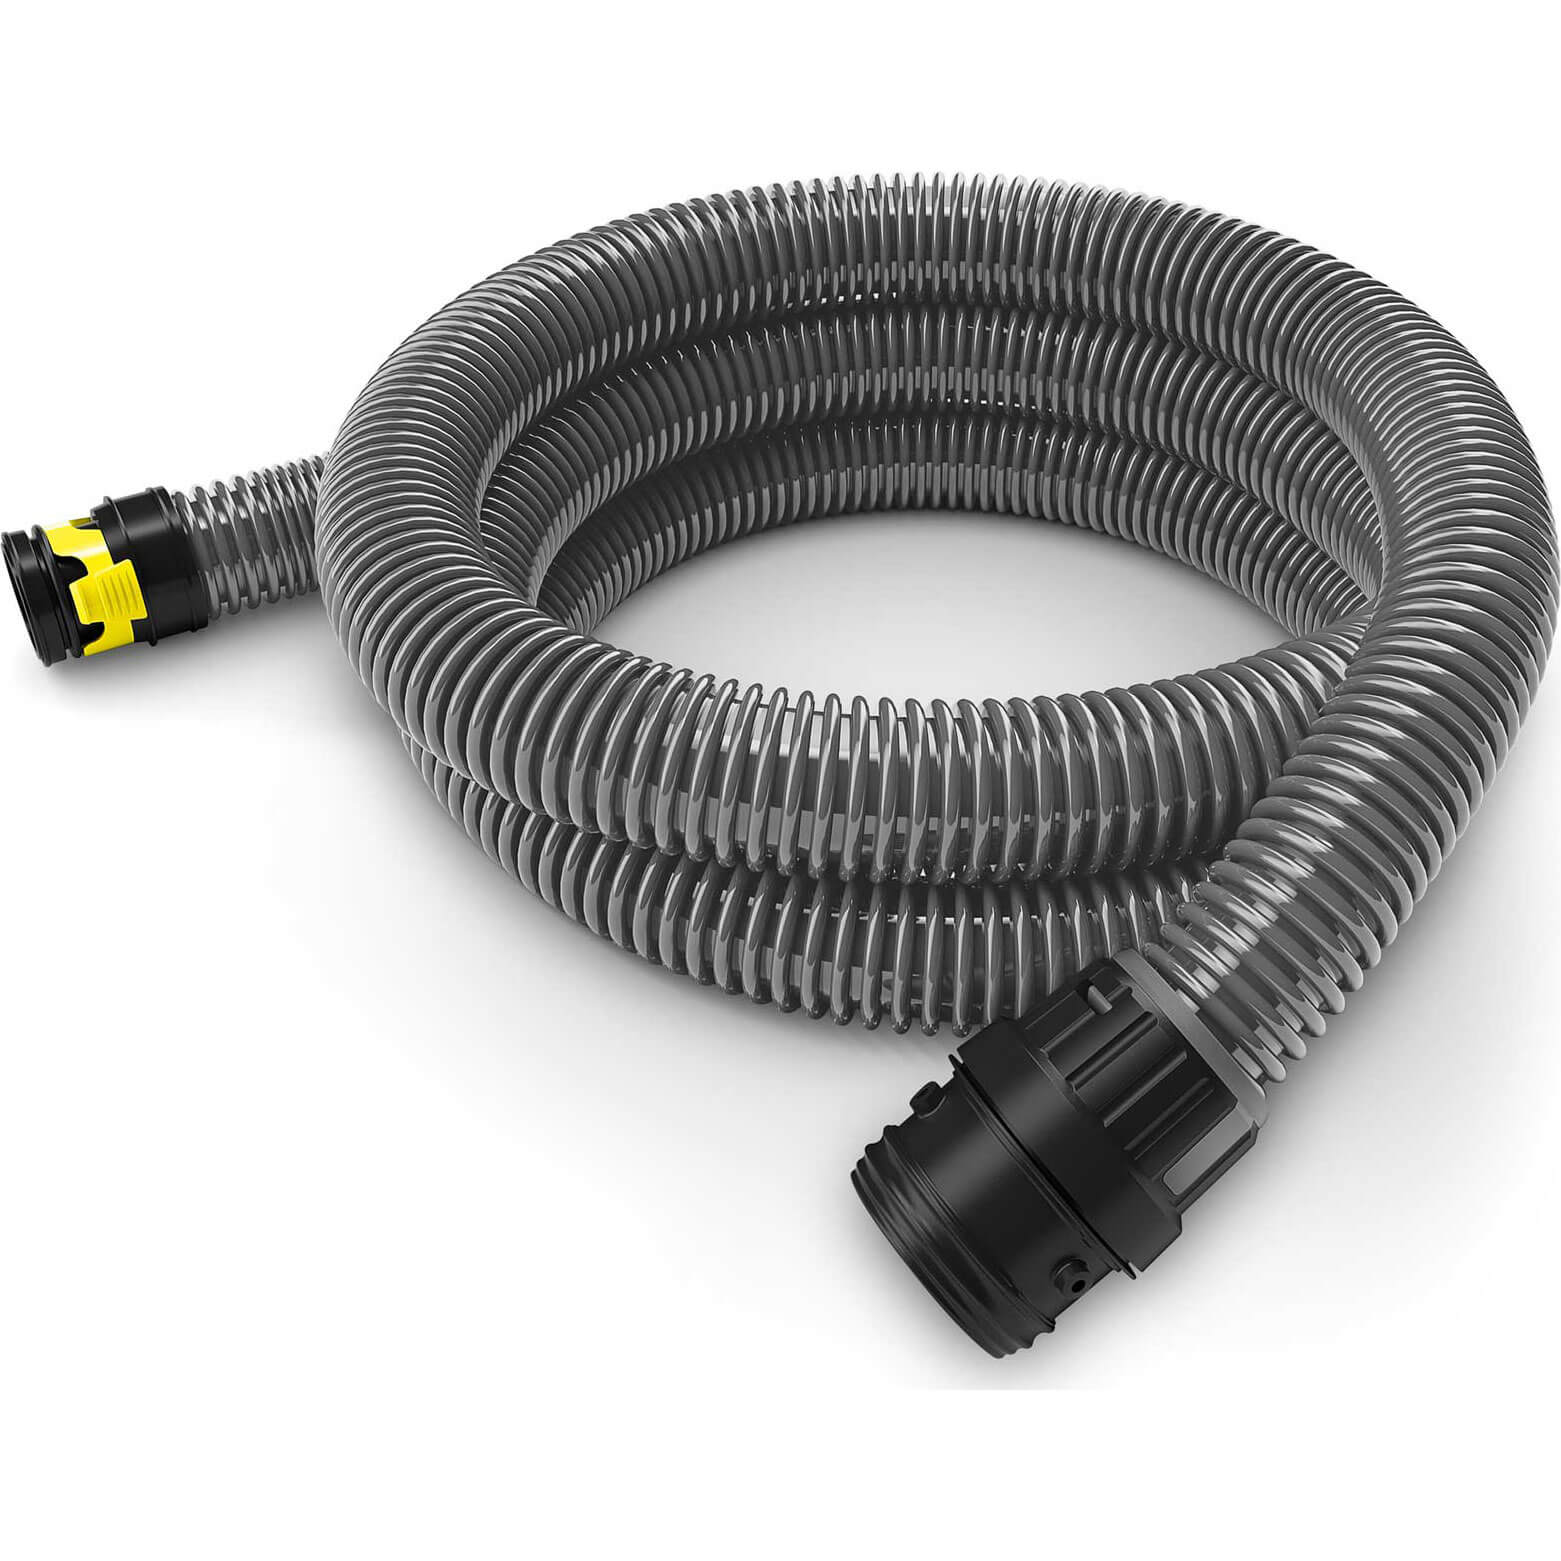 Image of Karcher Suction Hose 2.5m for NT 22/1 and 40/1 Vacuum Cleaners 2.5m